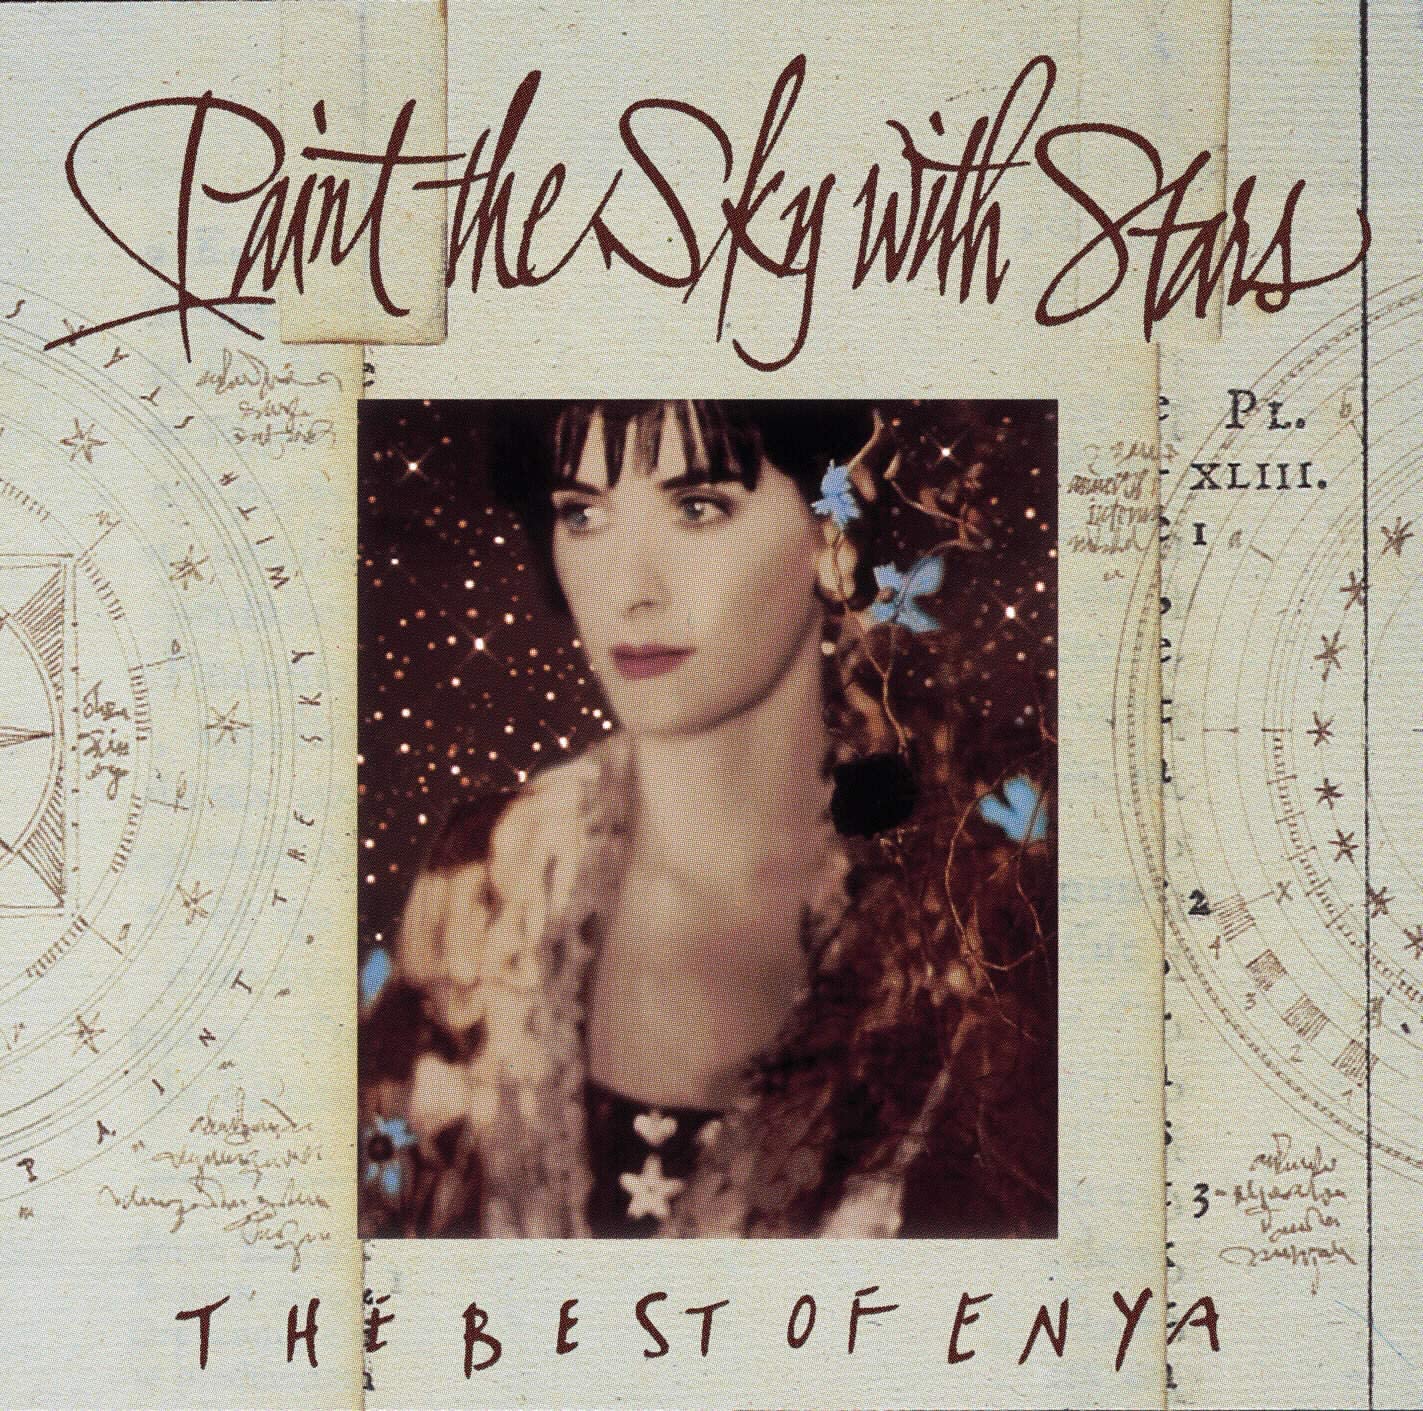 Enya – Paint The Sky With Stars - The Best Of Enya - CD